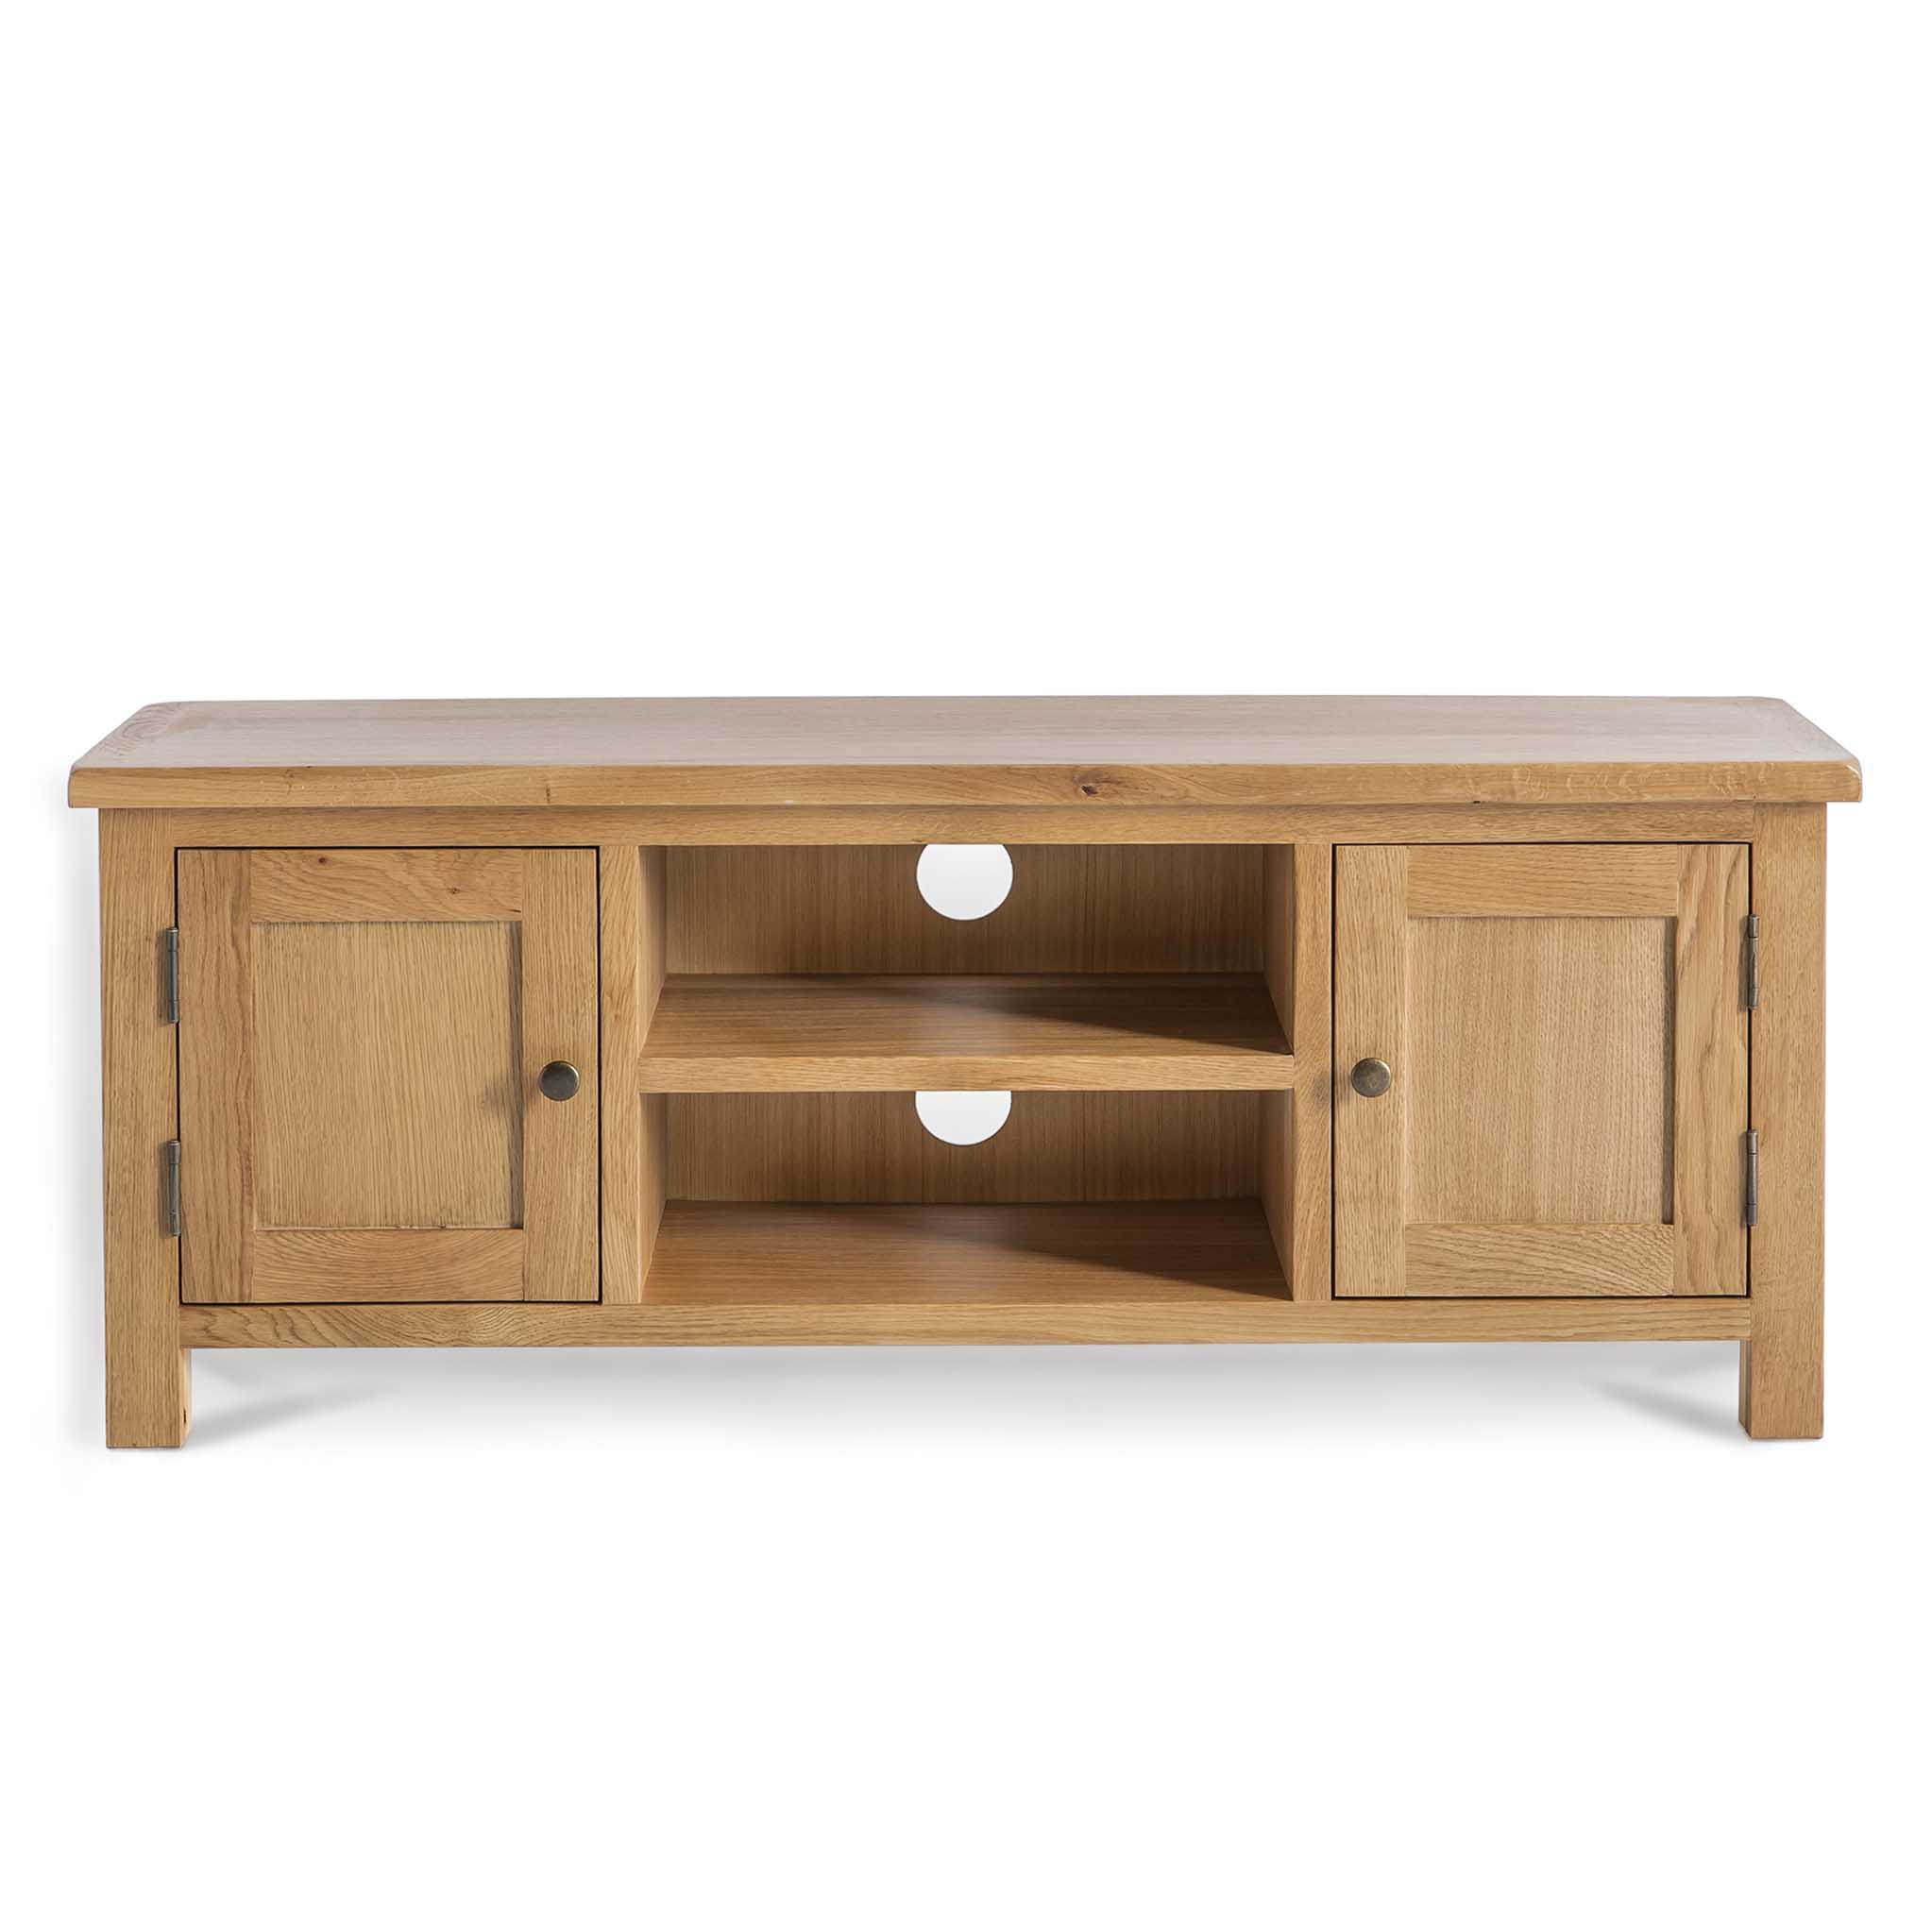 Surrey Oak 120cm Large Tv Stand Screens Up To 54 Rustic Waxed Oak